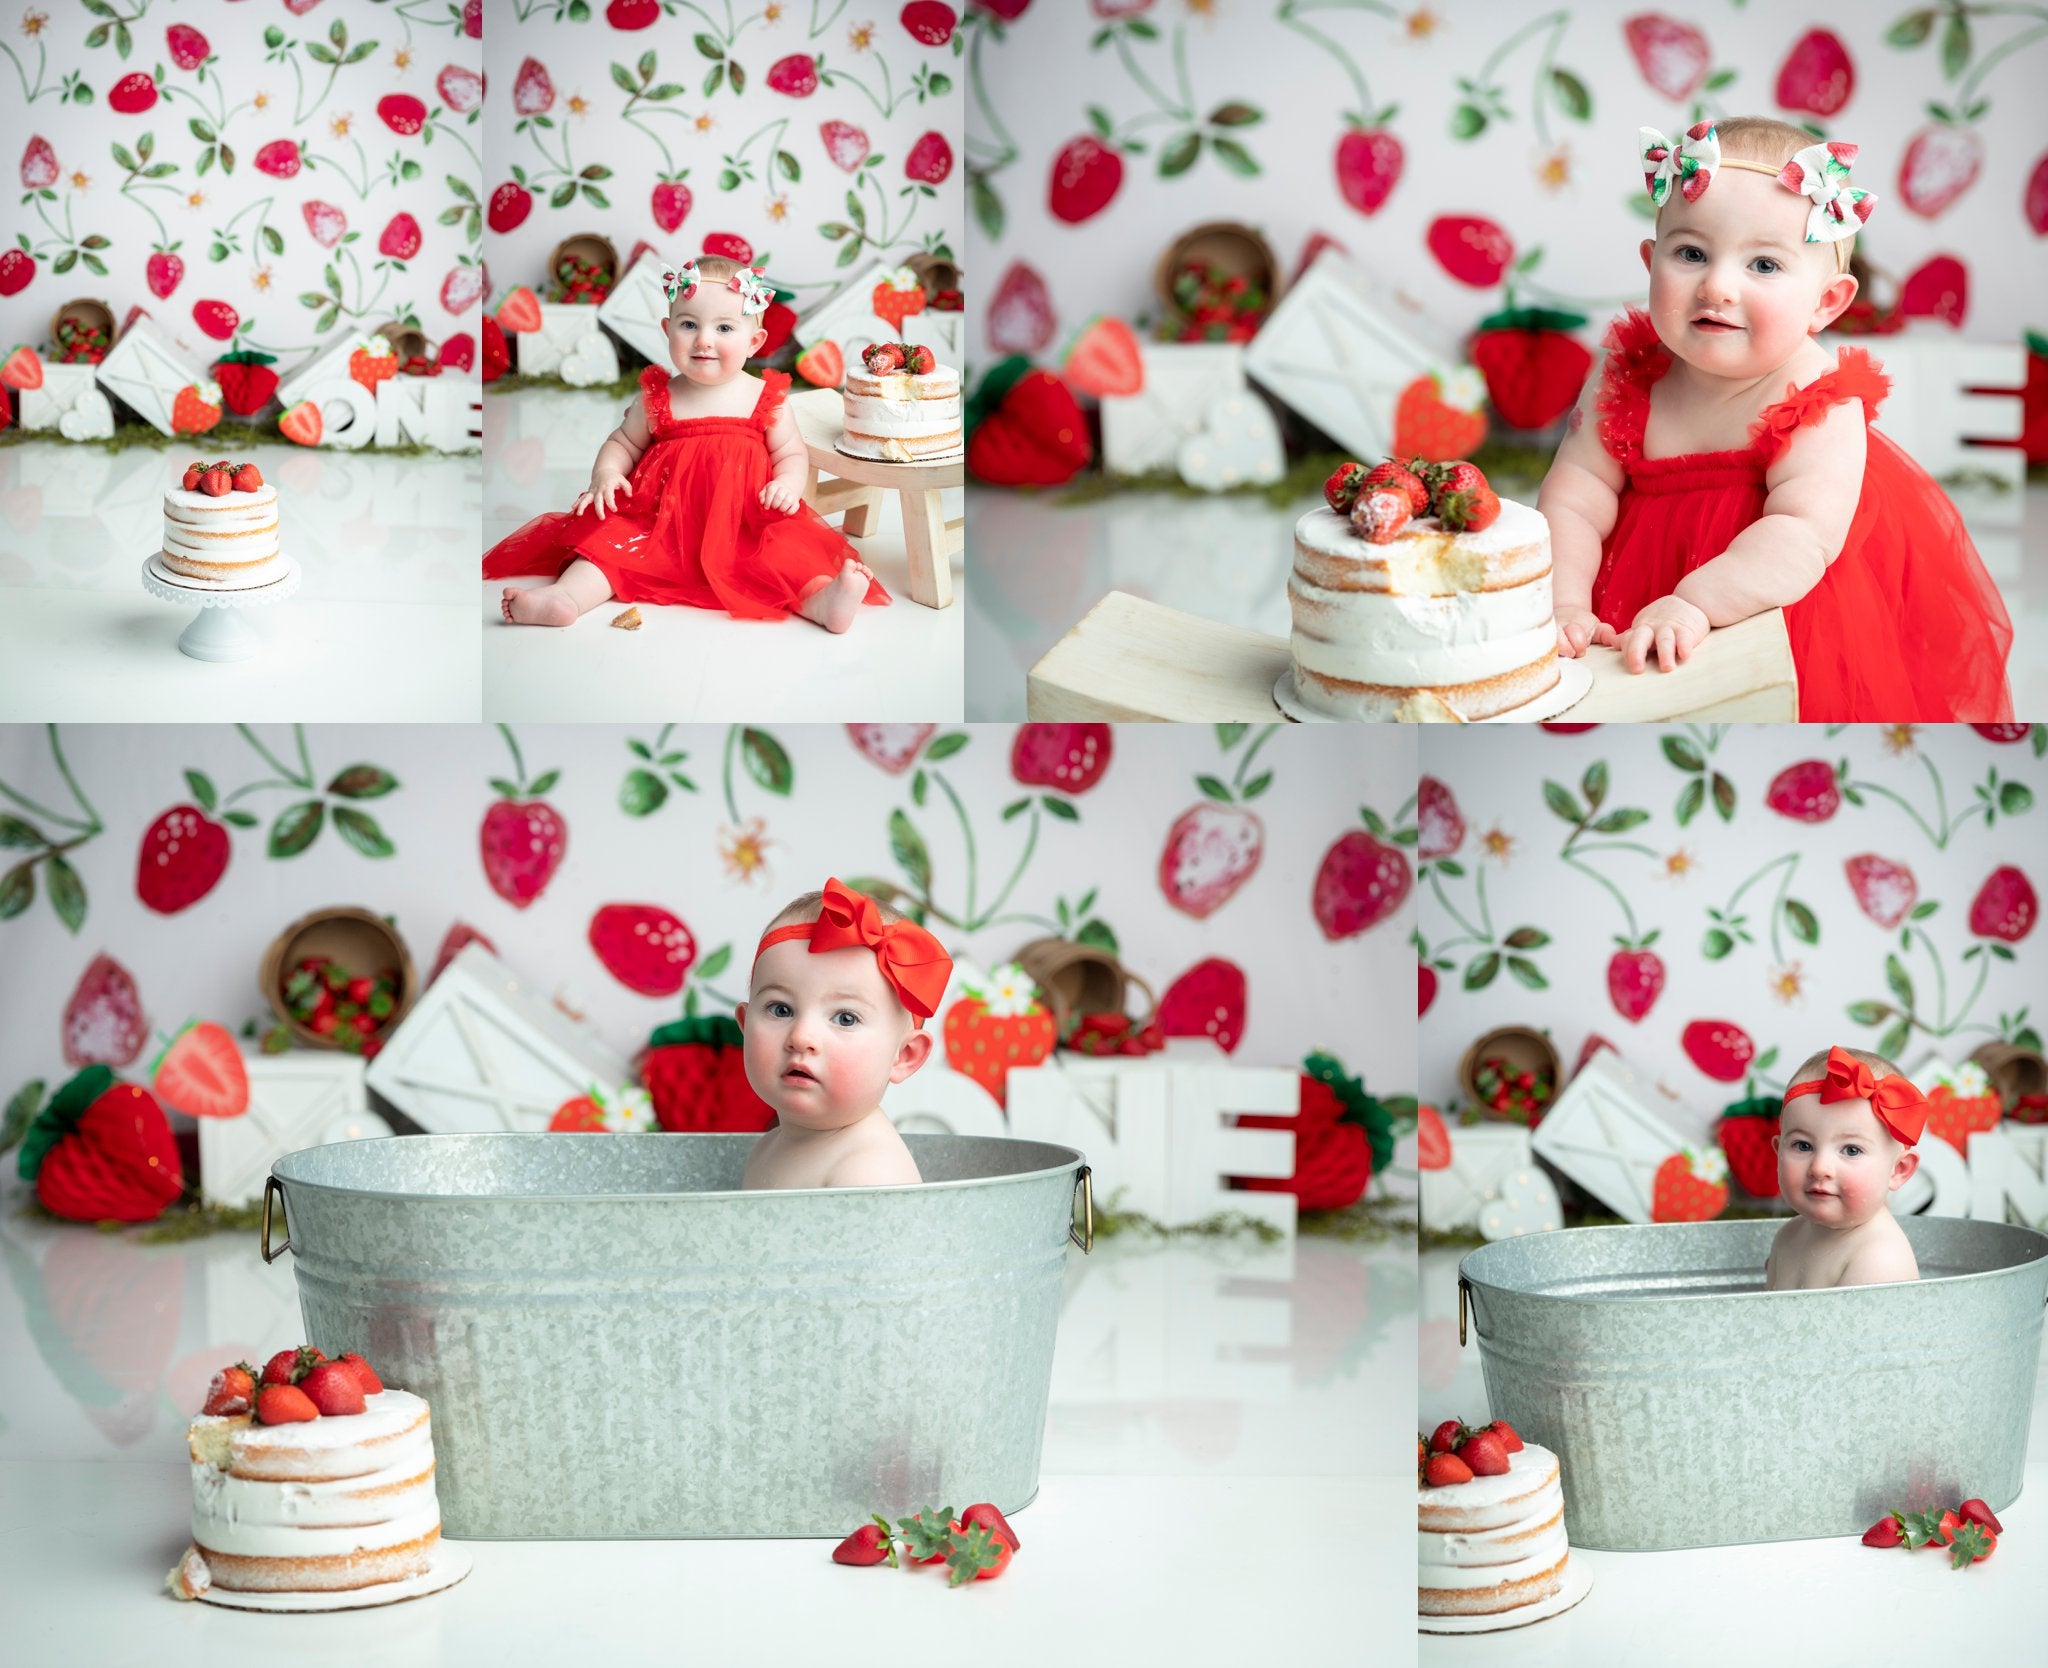 Kate Strawberry Watercolor Backdrop Designed by Mandy Ringe Photography